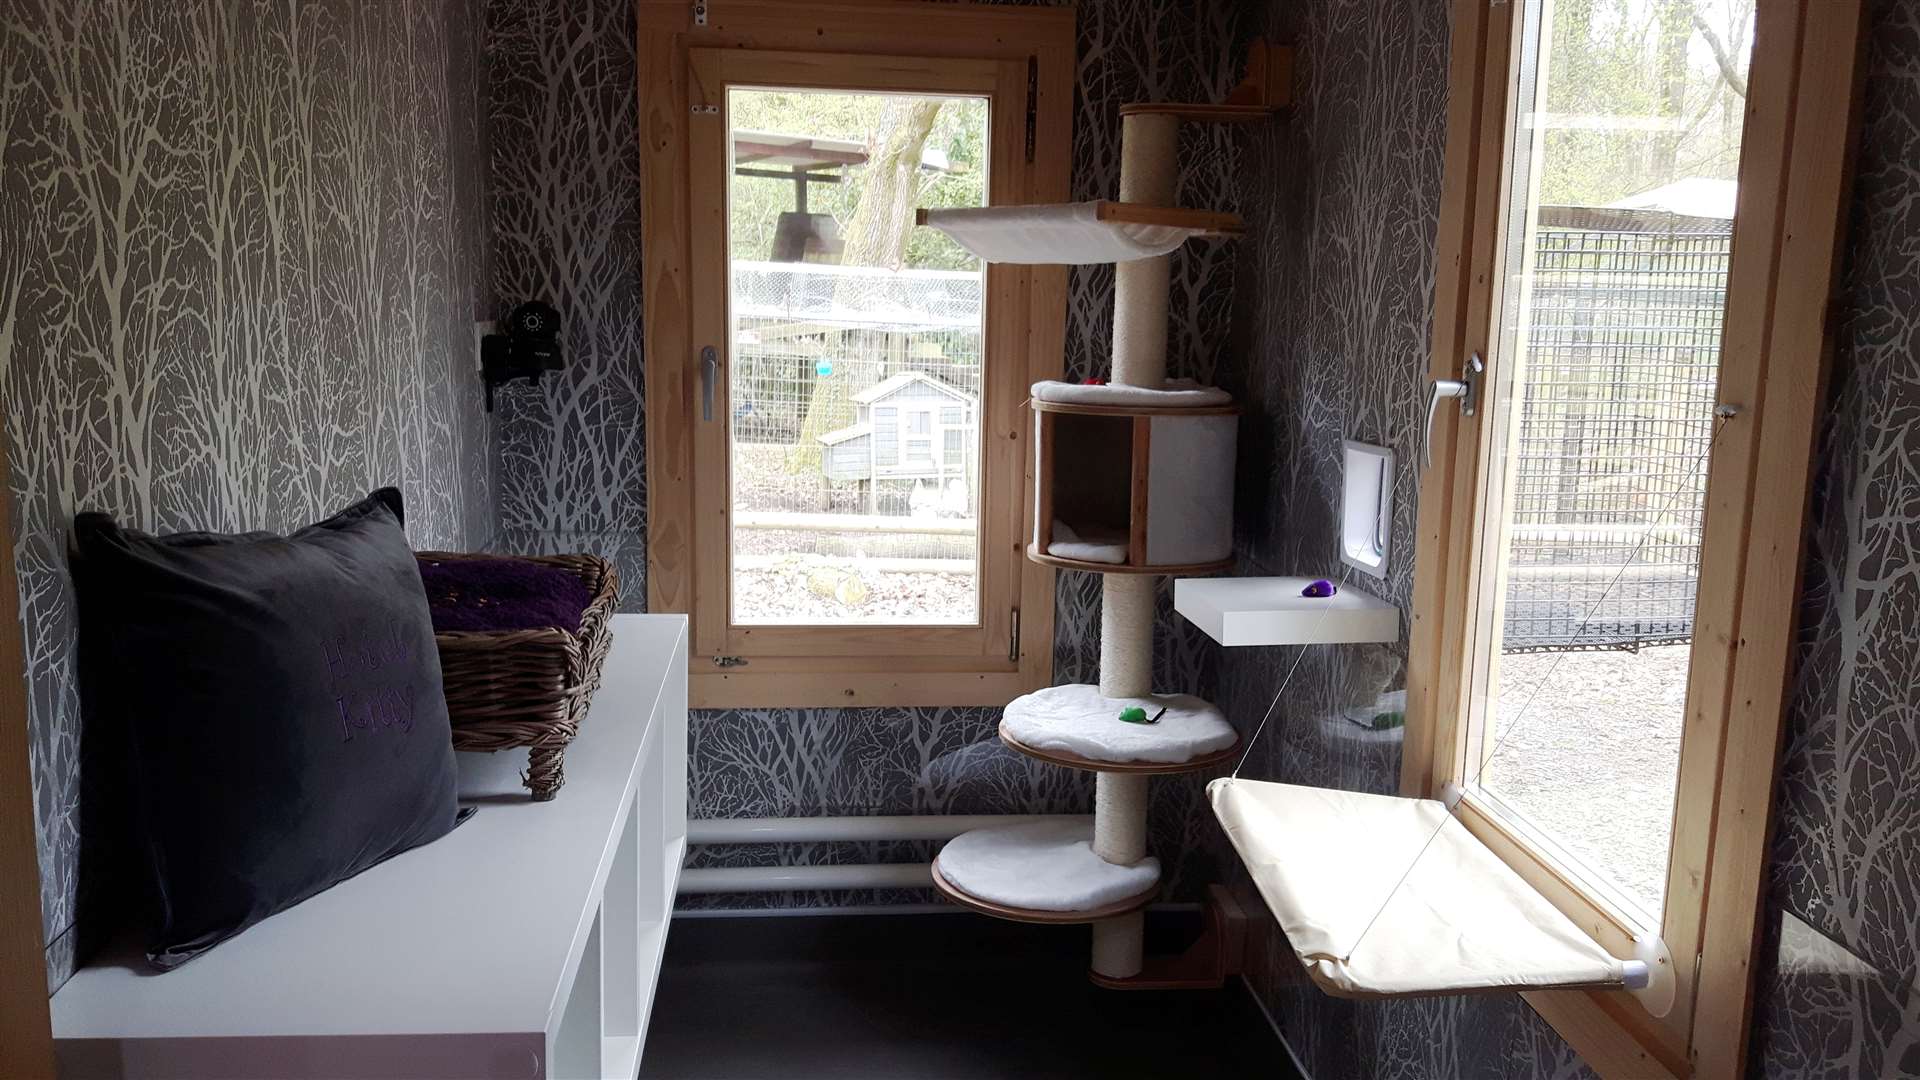 An example room at the cat hotel